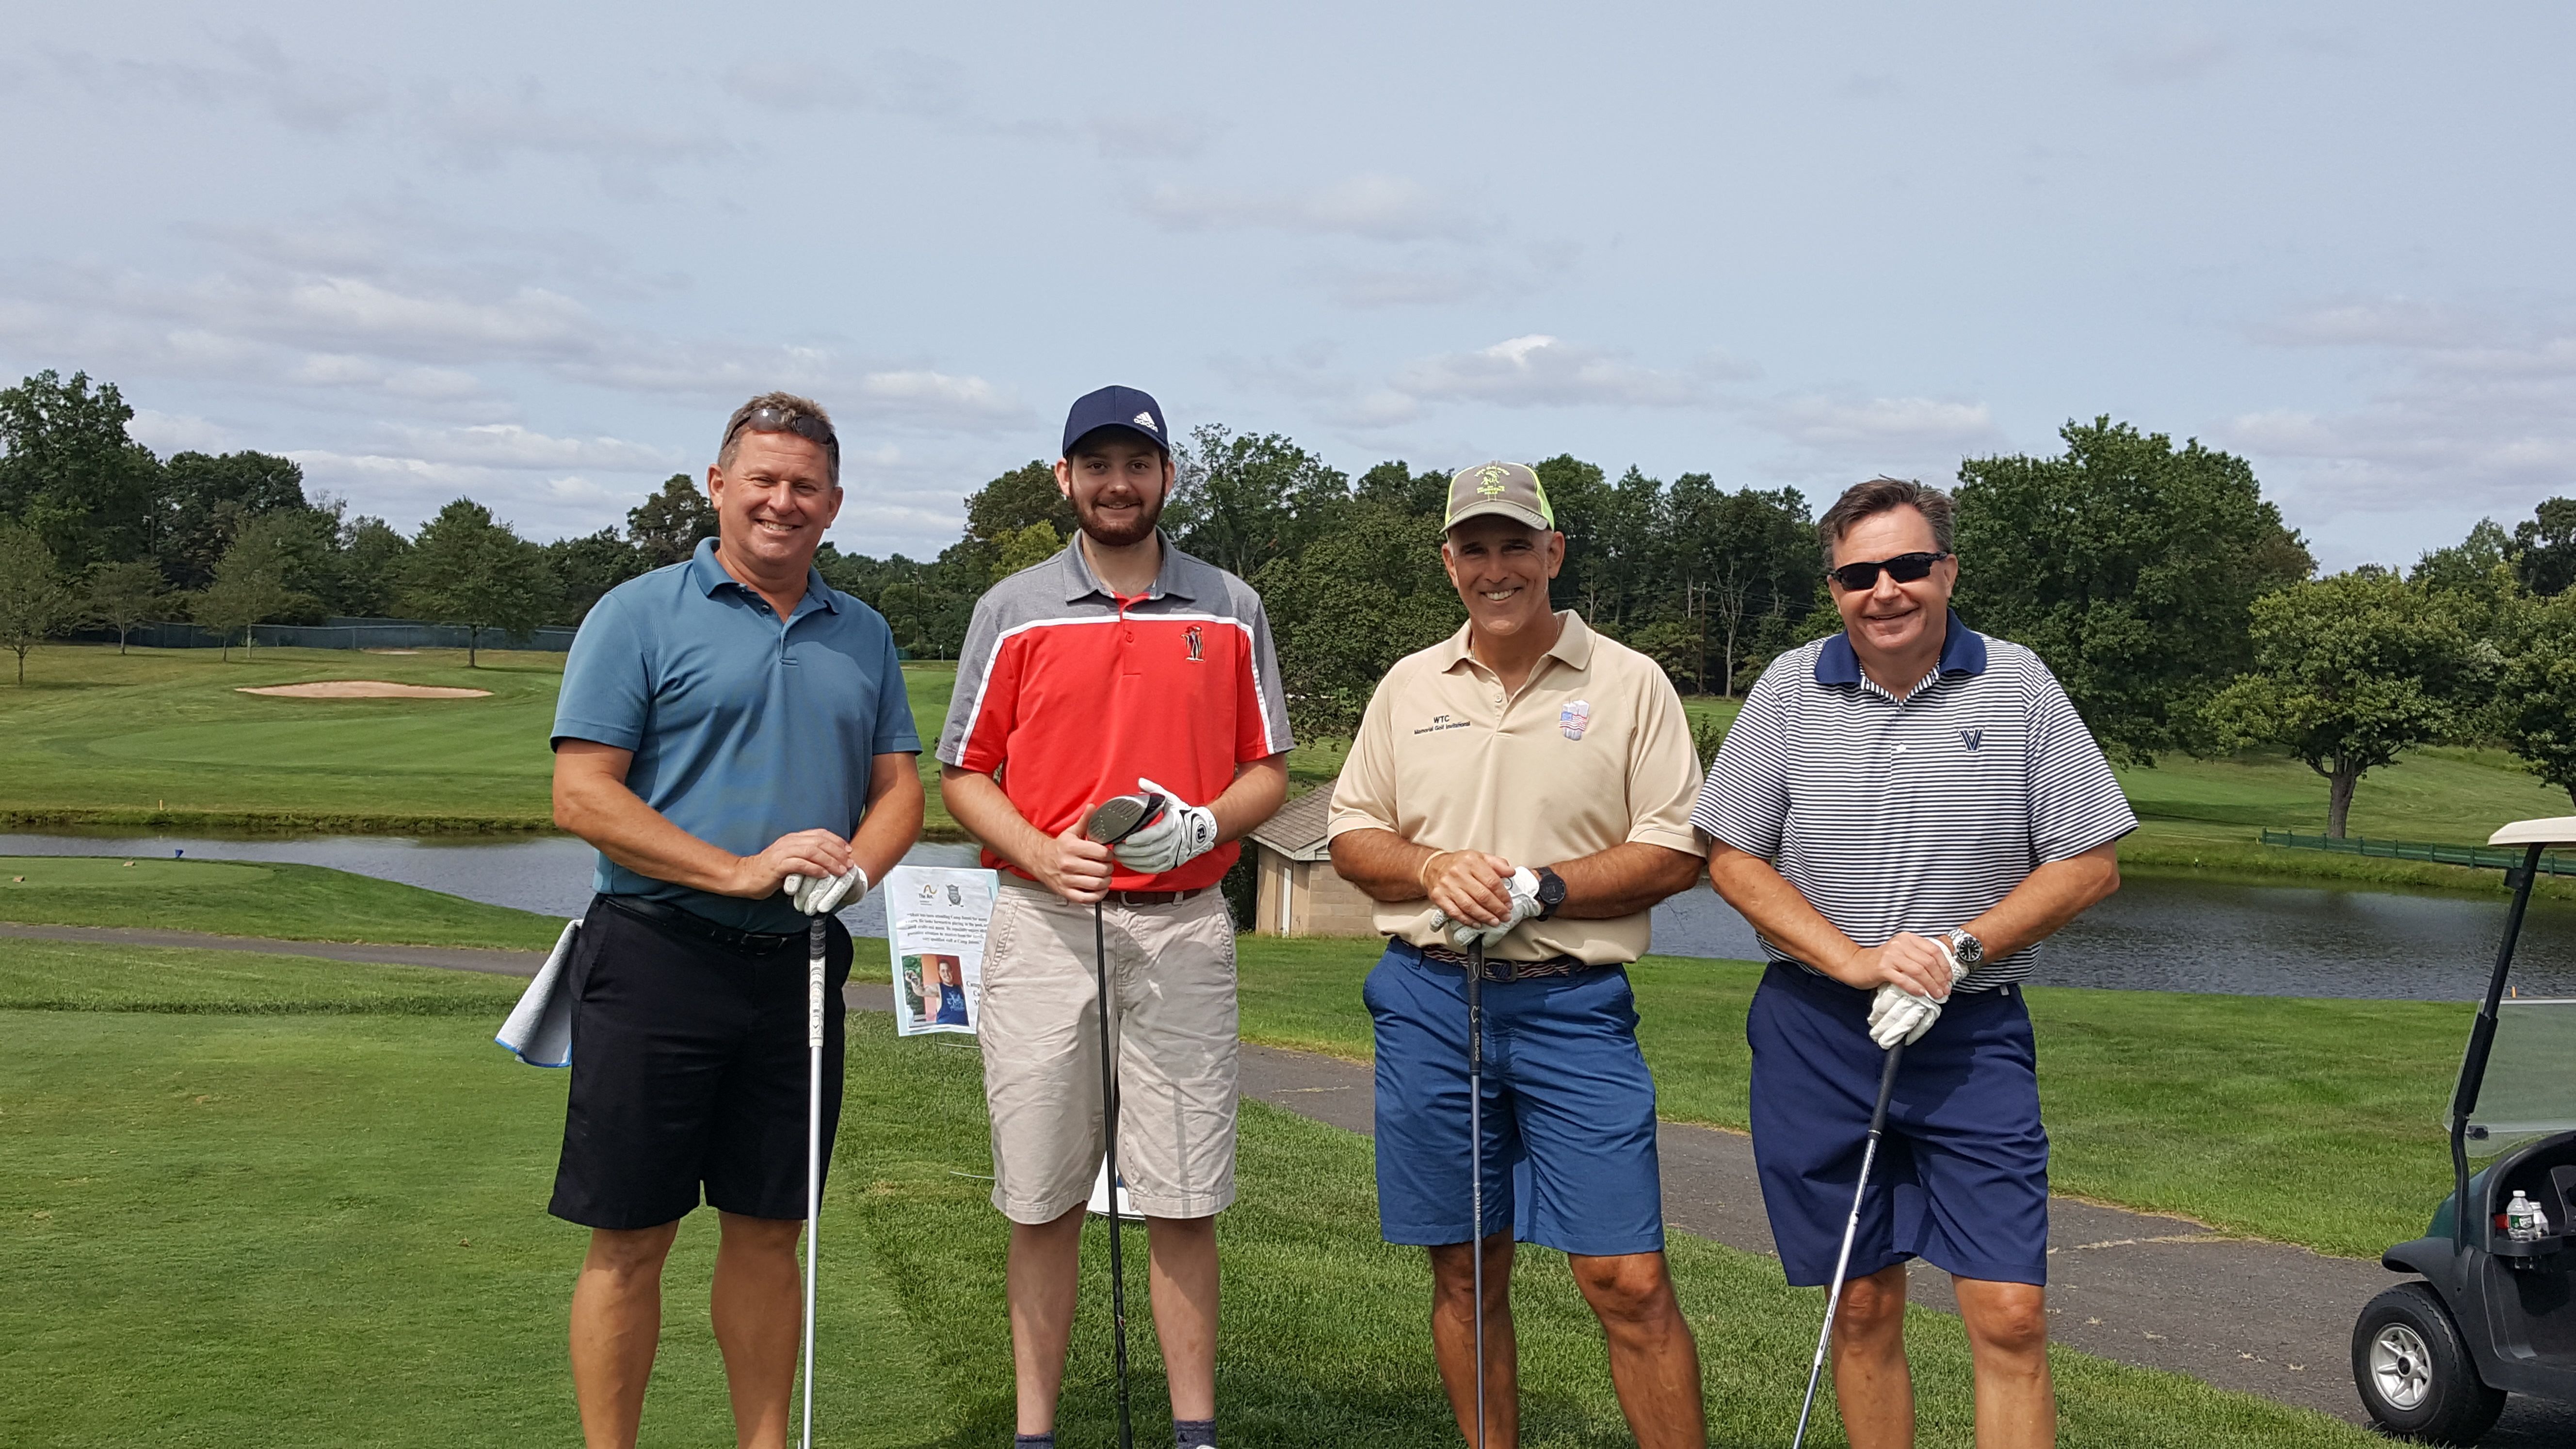 5th Annual "Clubs for Cabins" Golf Outing & Cocktail Dinner